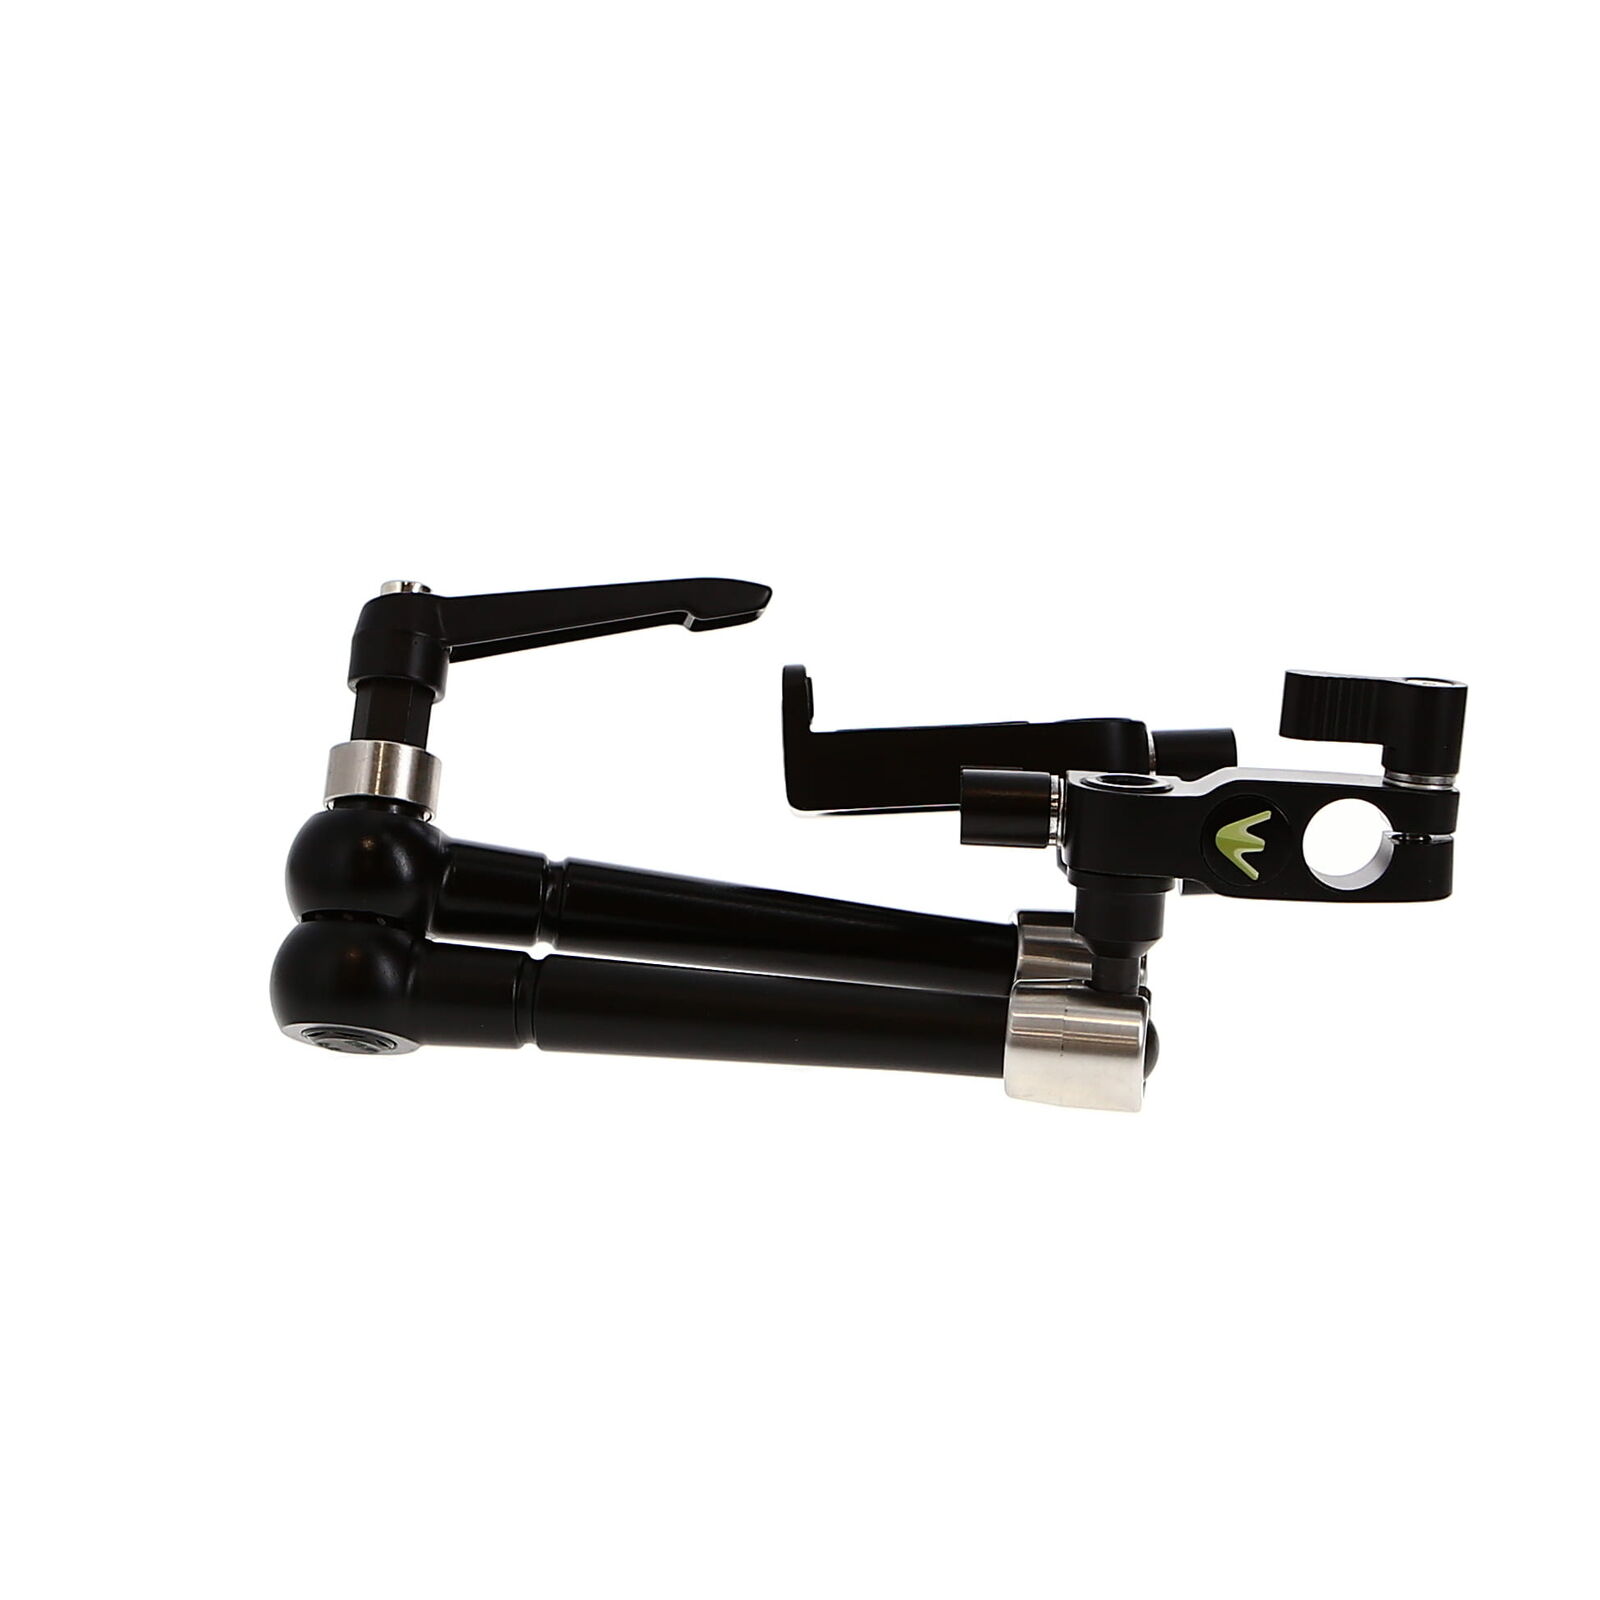 Axler Mar-13 Recodo Articulating Monitor Arm 13", Supports 10 Pounds